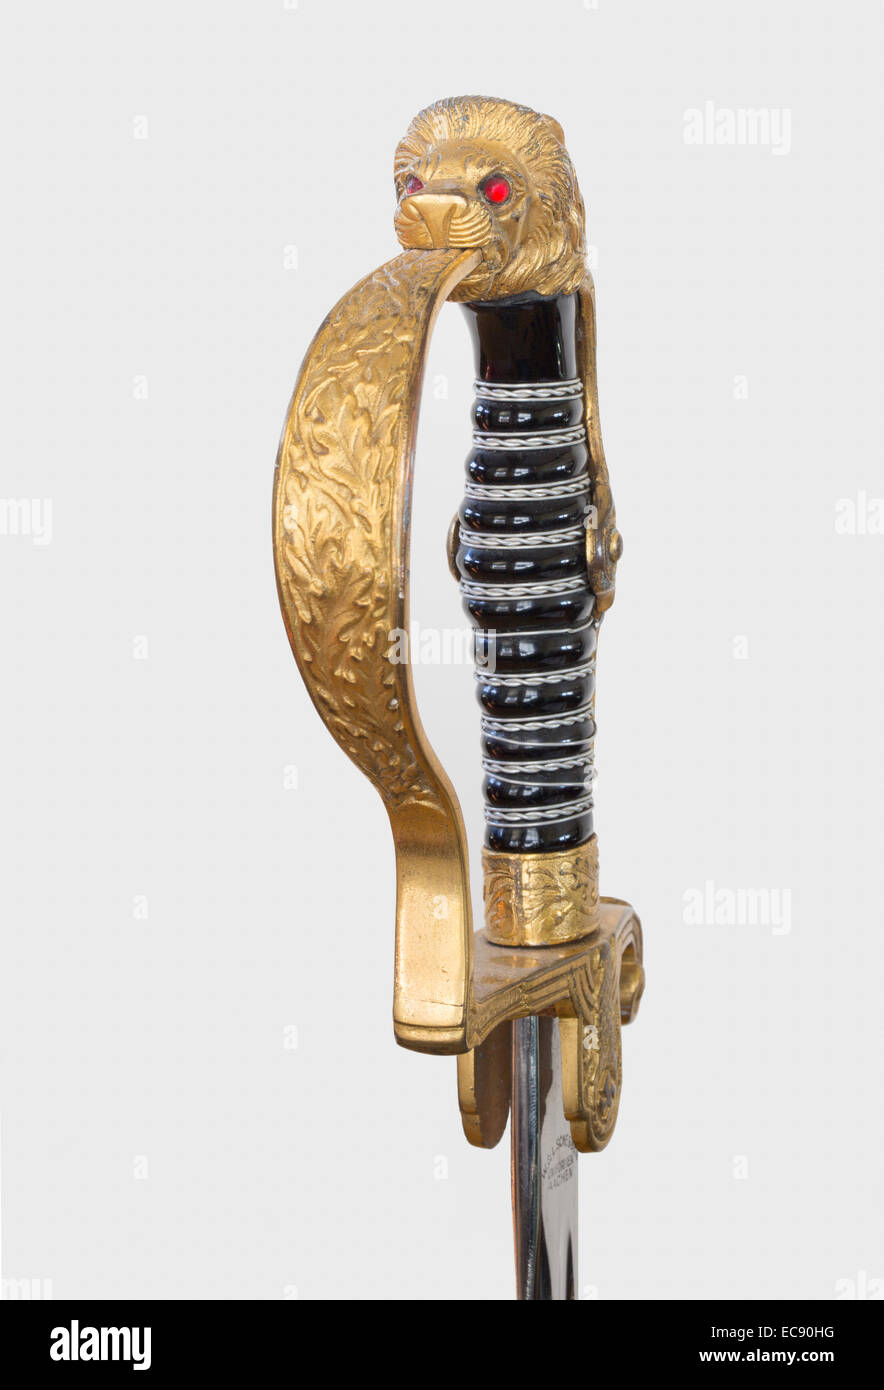 Close up detail of a 1940s WWII Nazi military army dress sword with a lion's head pommel with red glass eyes. Stock Photo